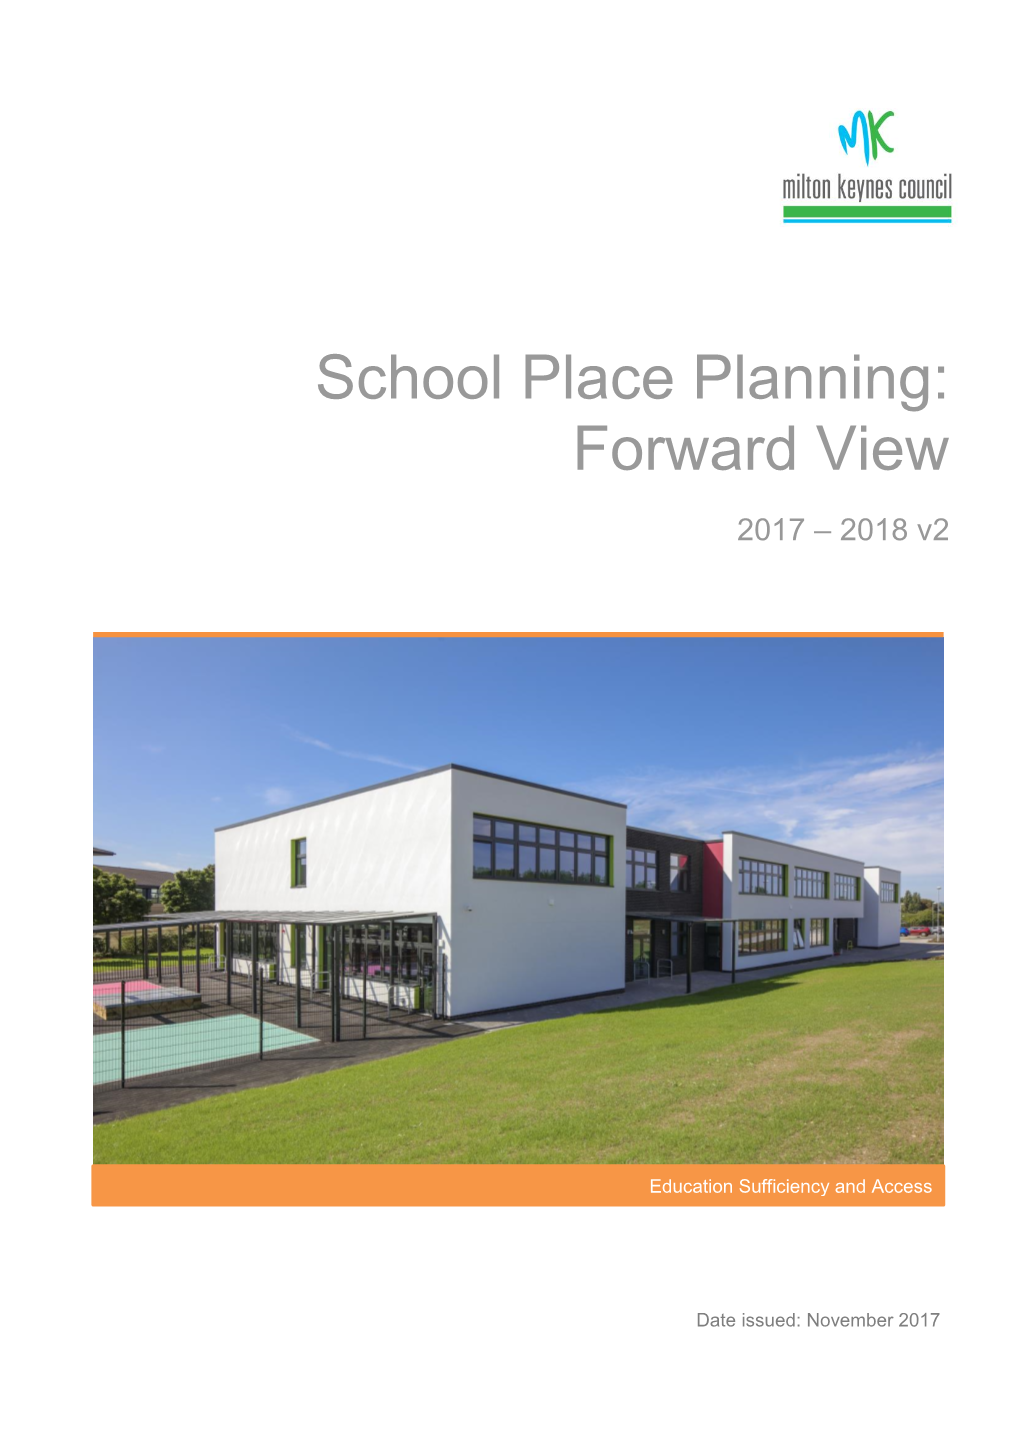 School Place Planning: Forward View 2017-2018